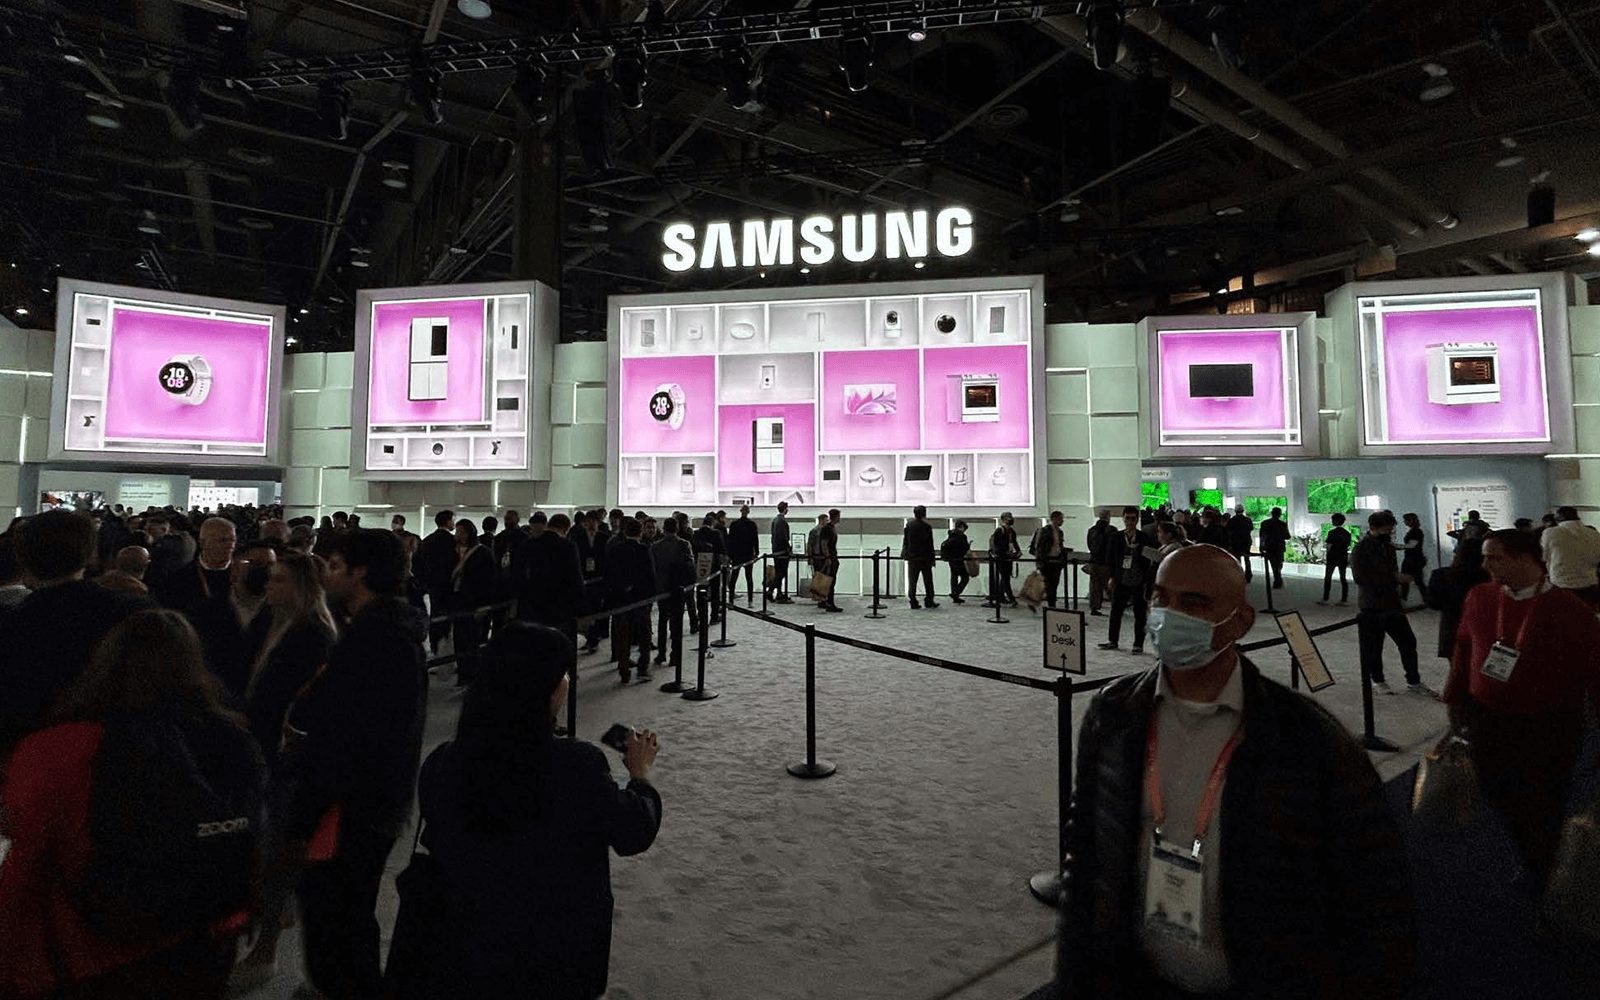 Samsung's incredible presence at CES 2023